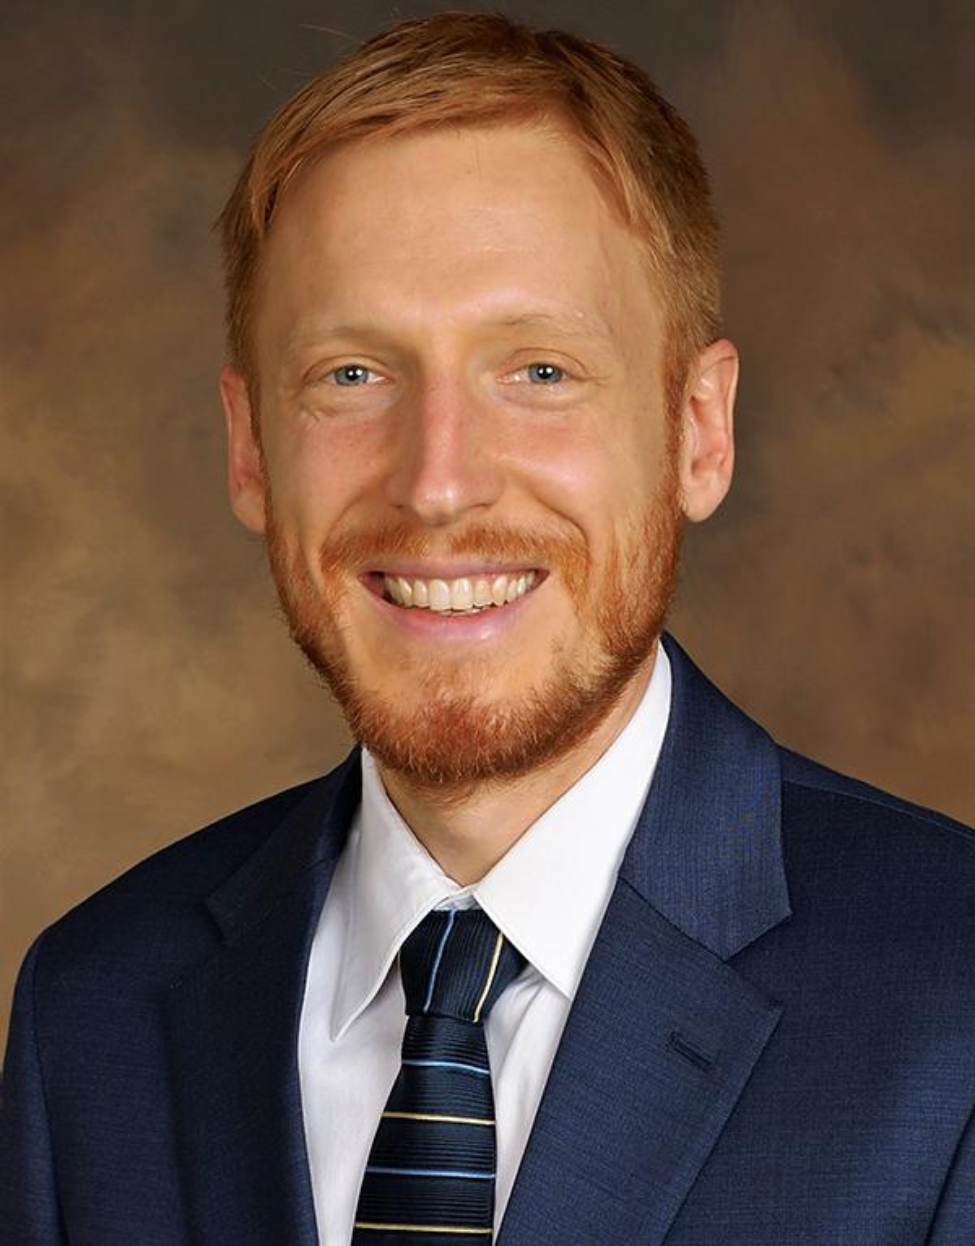 A photo of Louis Brown, PhD, assistant professor of health promotion and behavioral sciences at UTHealth School of Public Health in El Paso, Texas. Photo credit: UTHealth